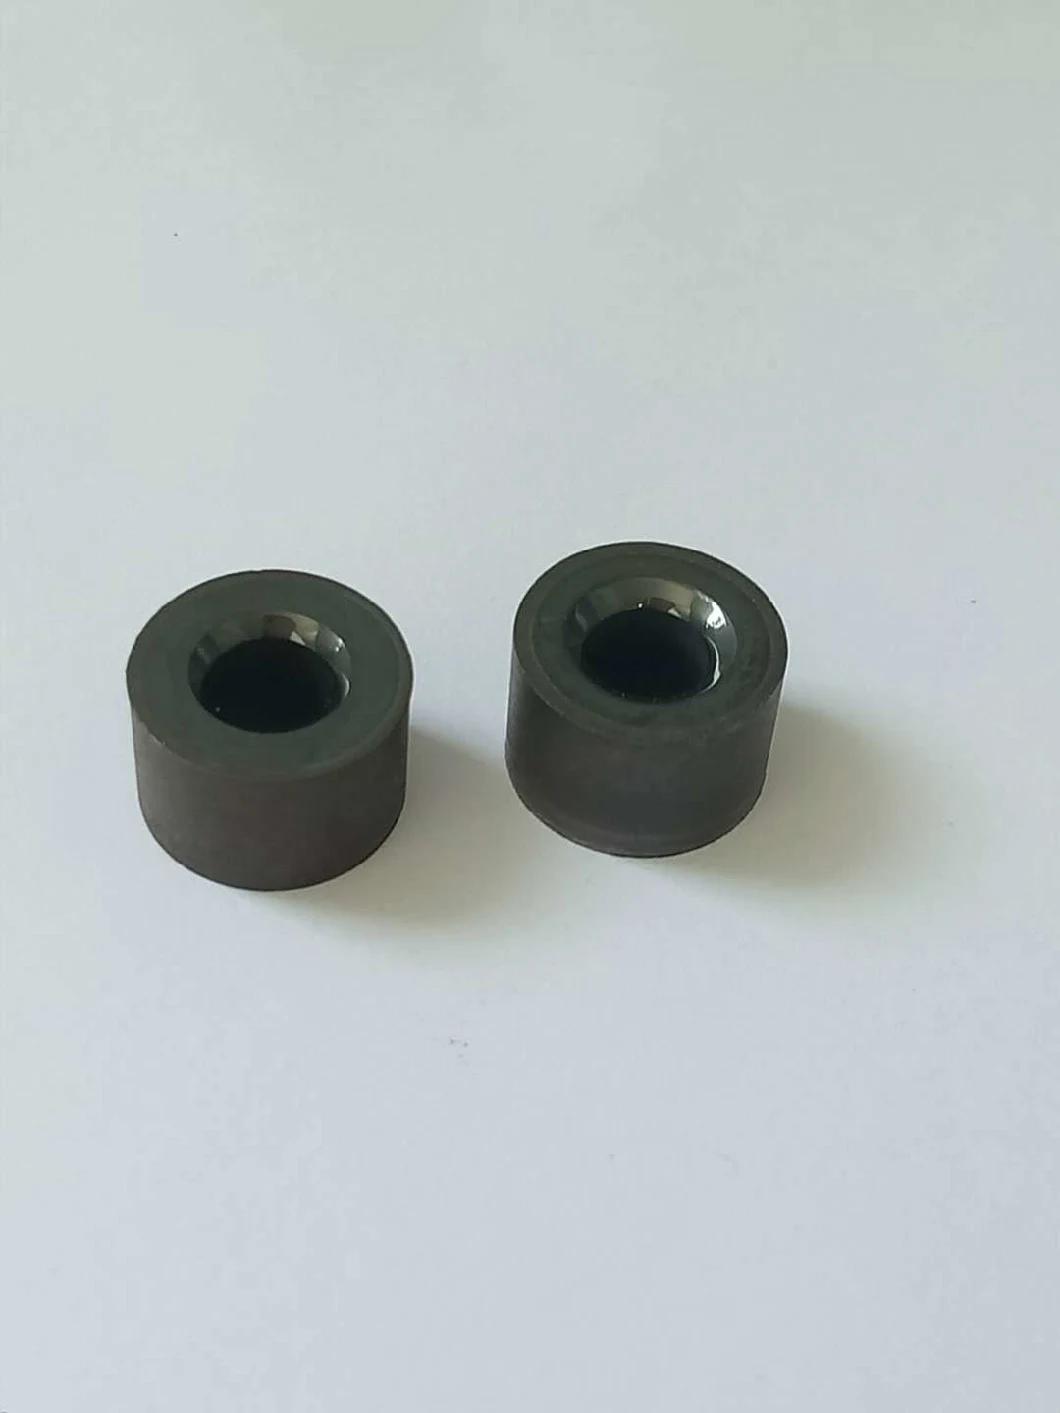 Wire Dies with Conical Cases